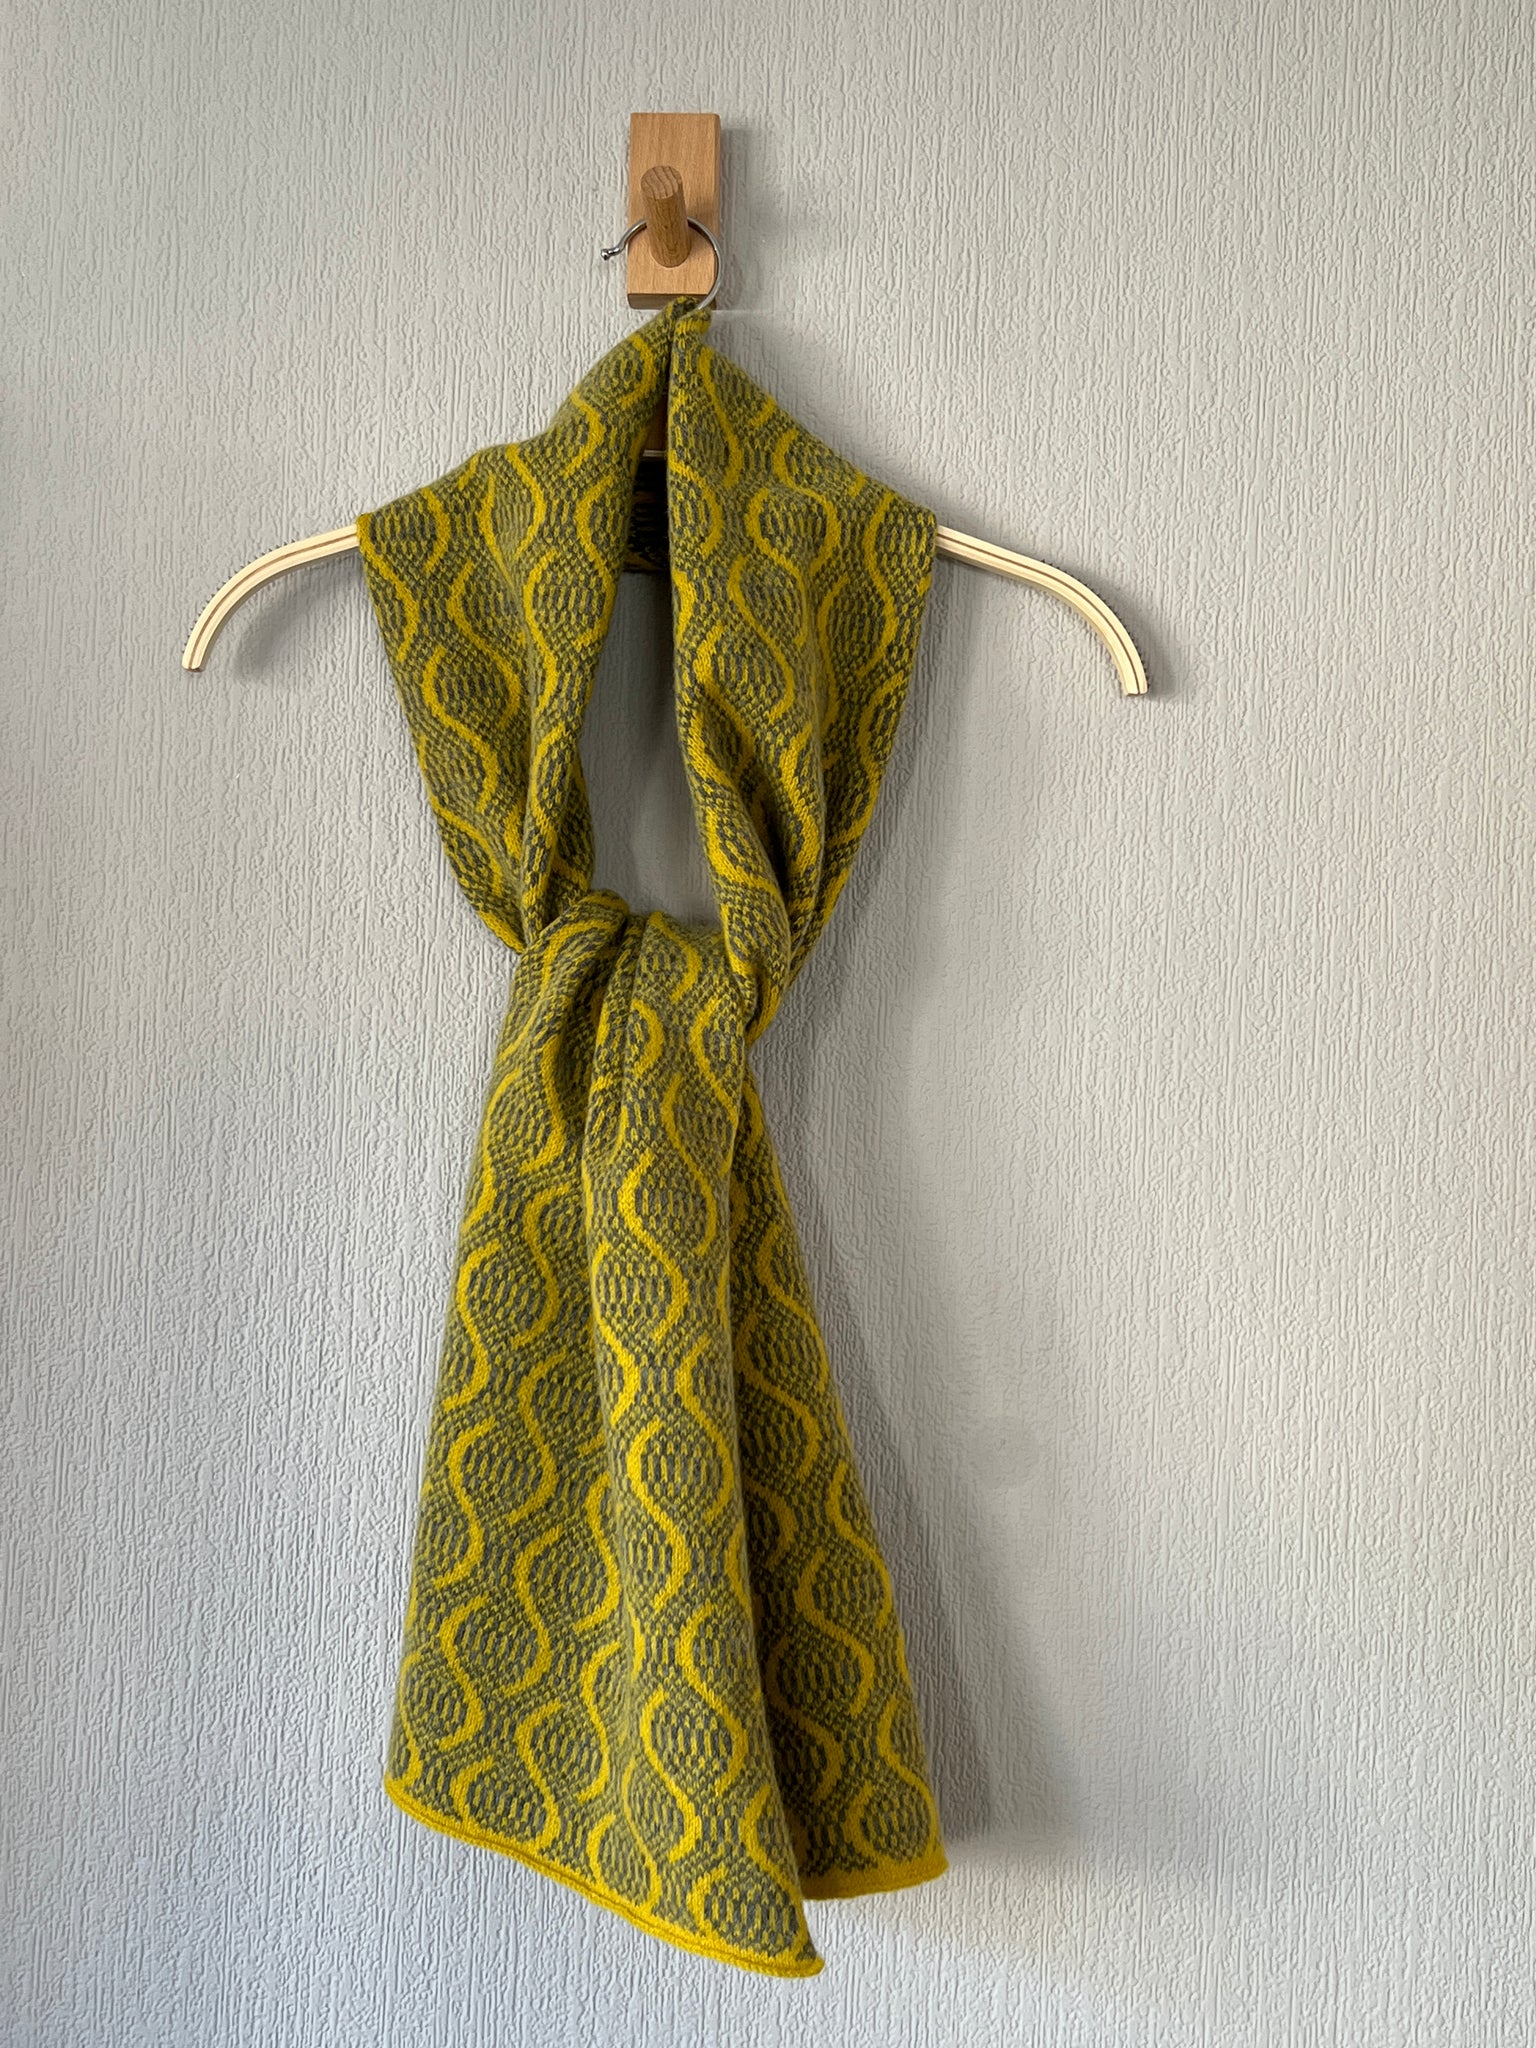 Scarf - soft merino lambswool cliff grey and piccalilli yellow